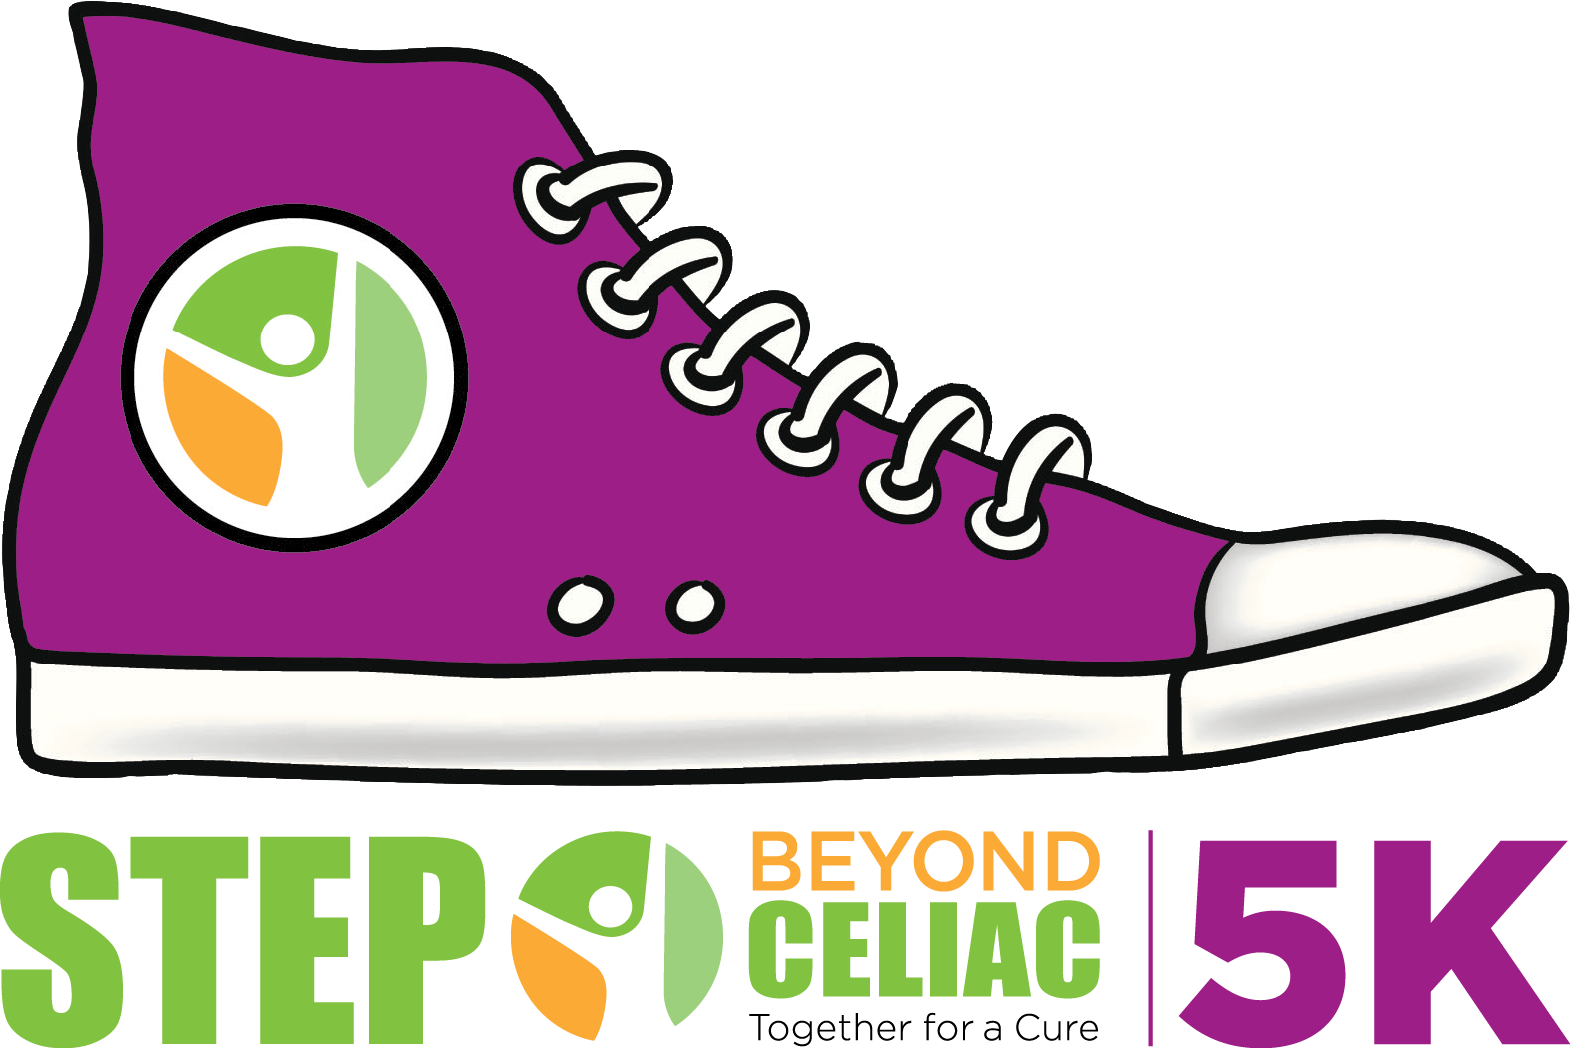 The Step Beyond Celiac 5K events raise awareness and funds for research for celiac disease. www.StepBeyondCeliac.org